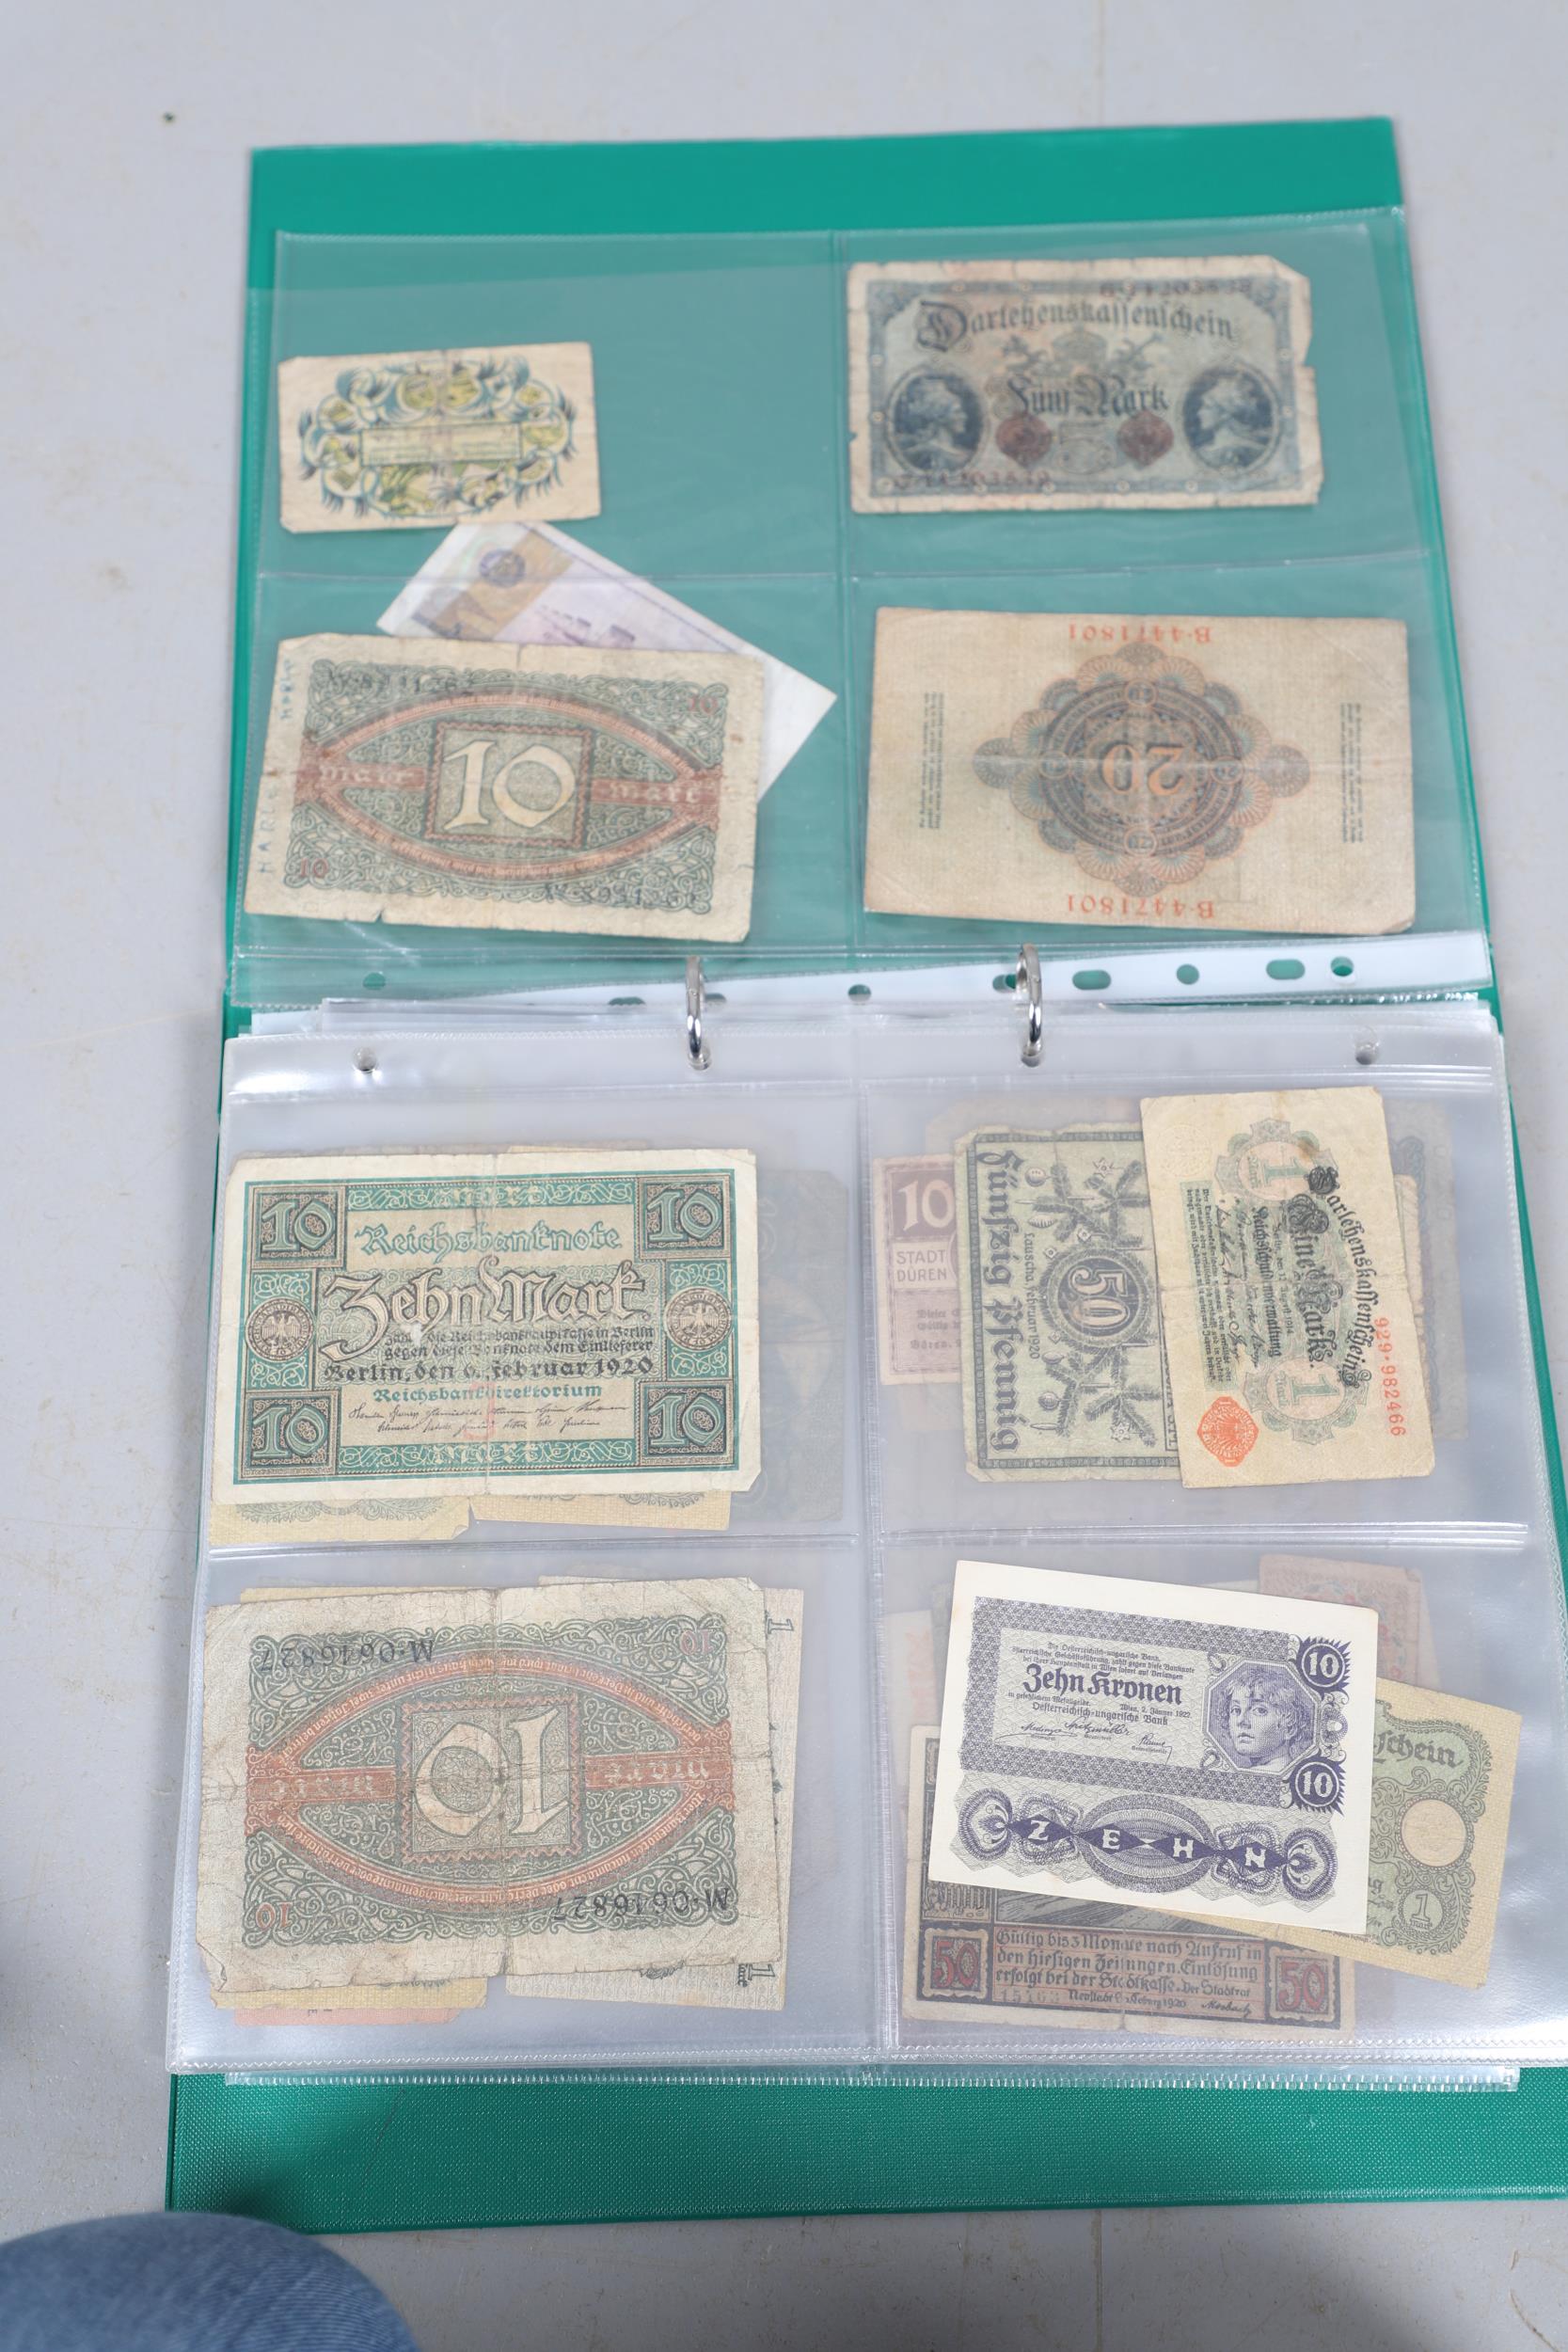 AN EXTENSIVE COLLECTION OF WORLD BANKNOTES. - Image 54 of 56